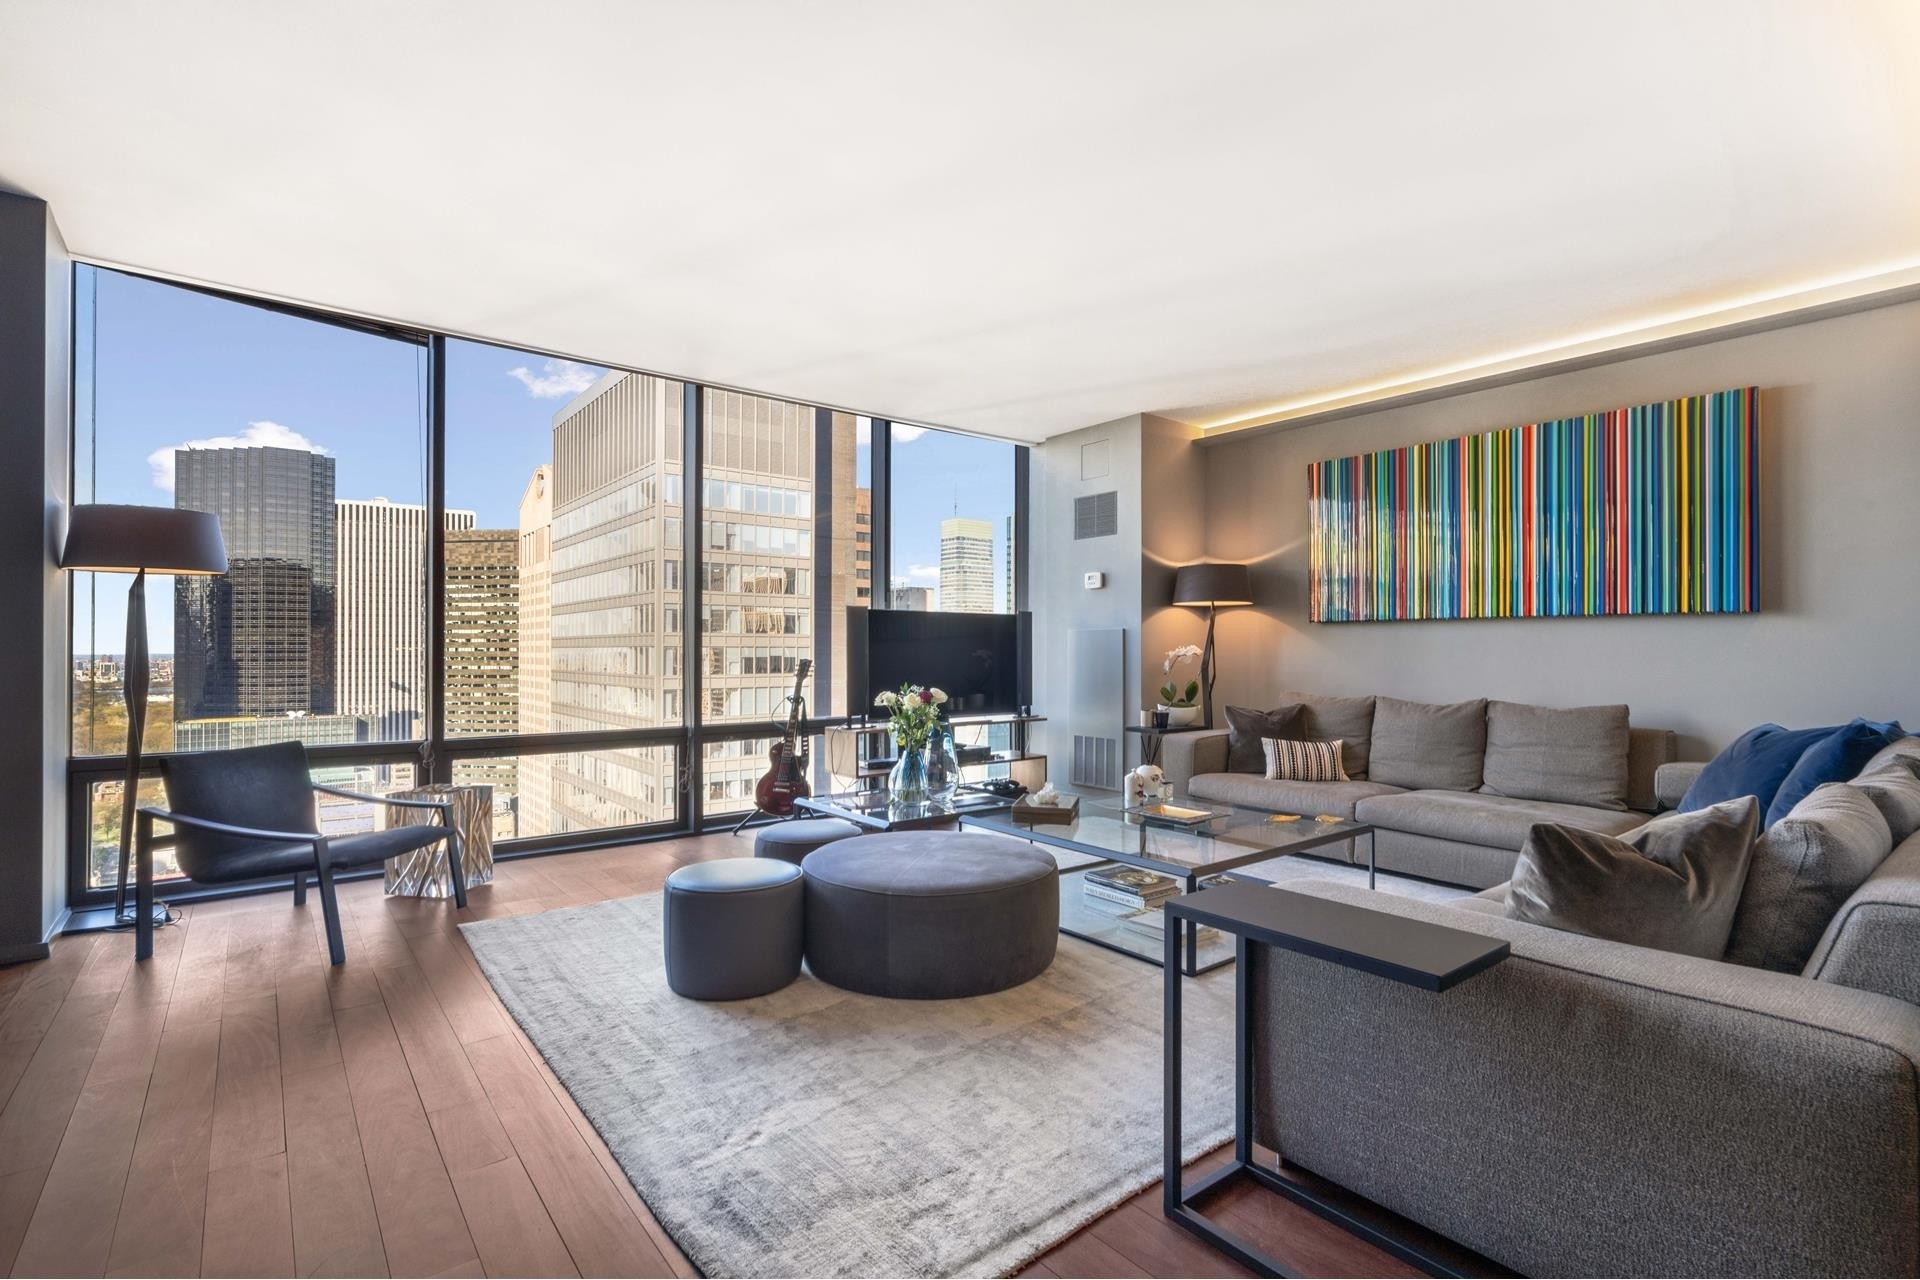 Condominium for Sale at Olympic Tower, 641 FIFTH AVE, 34B Turtle Bay, New York, New York 10022